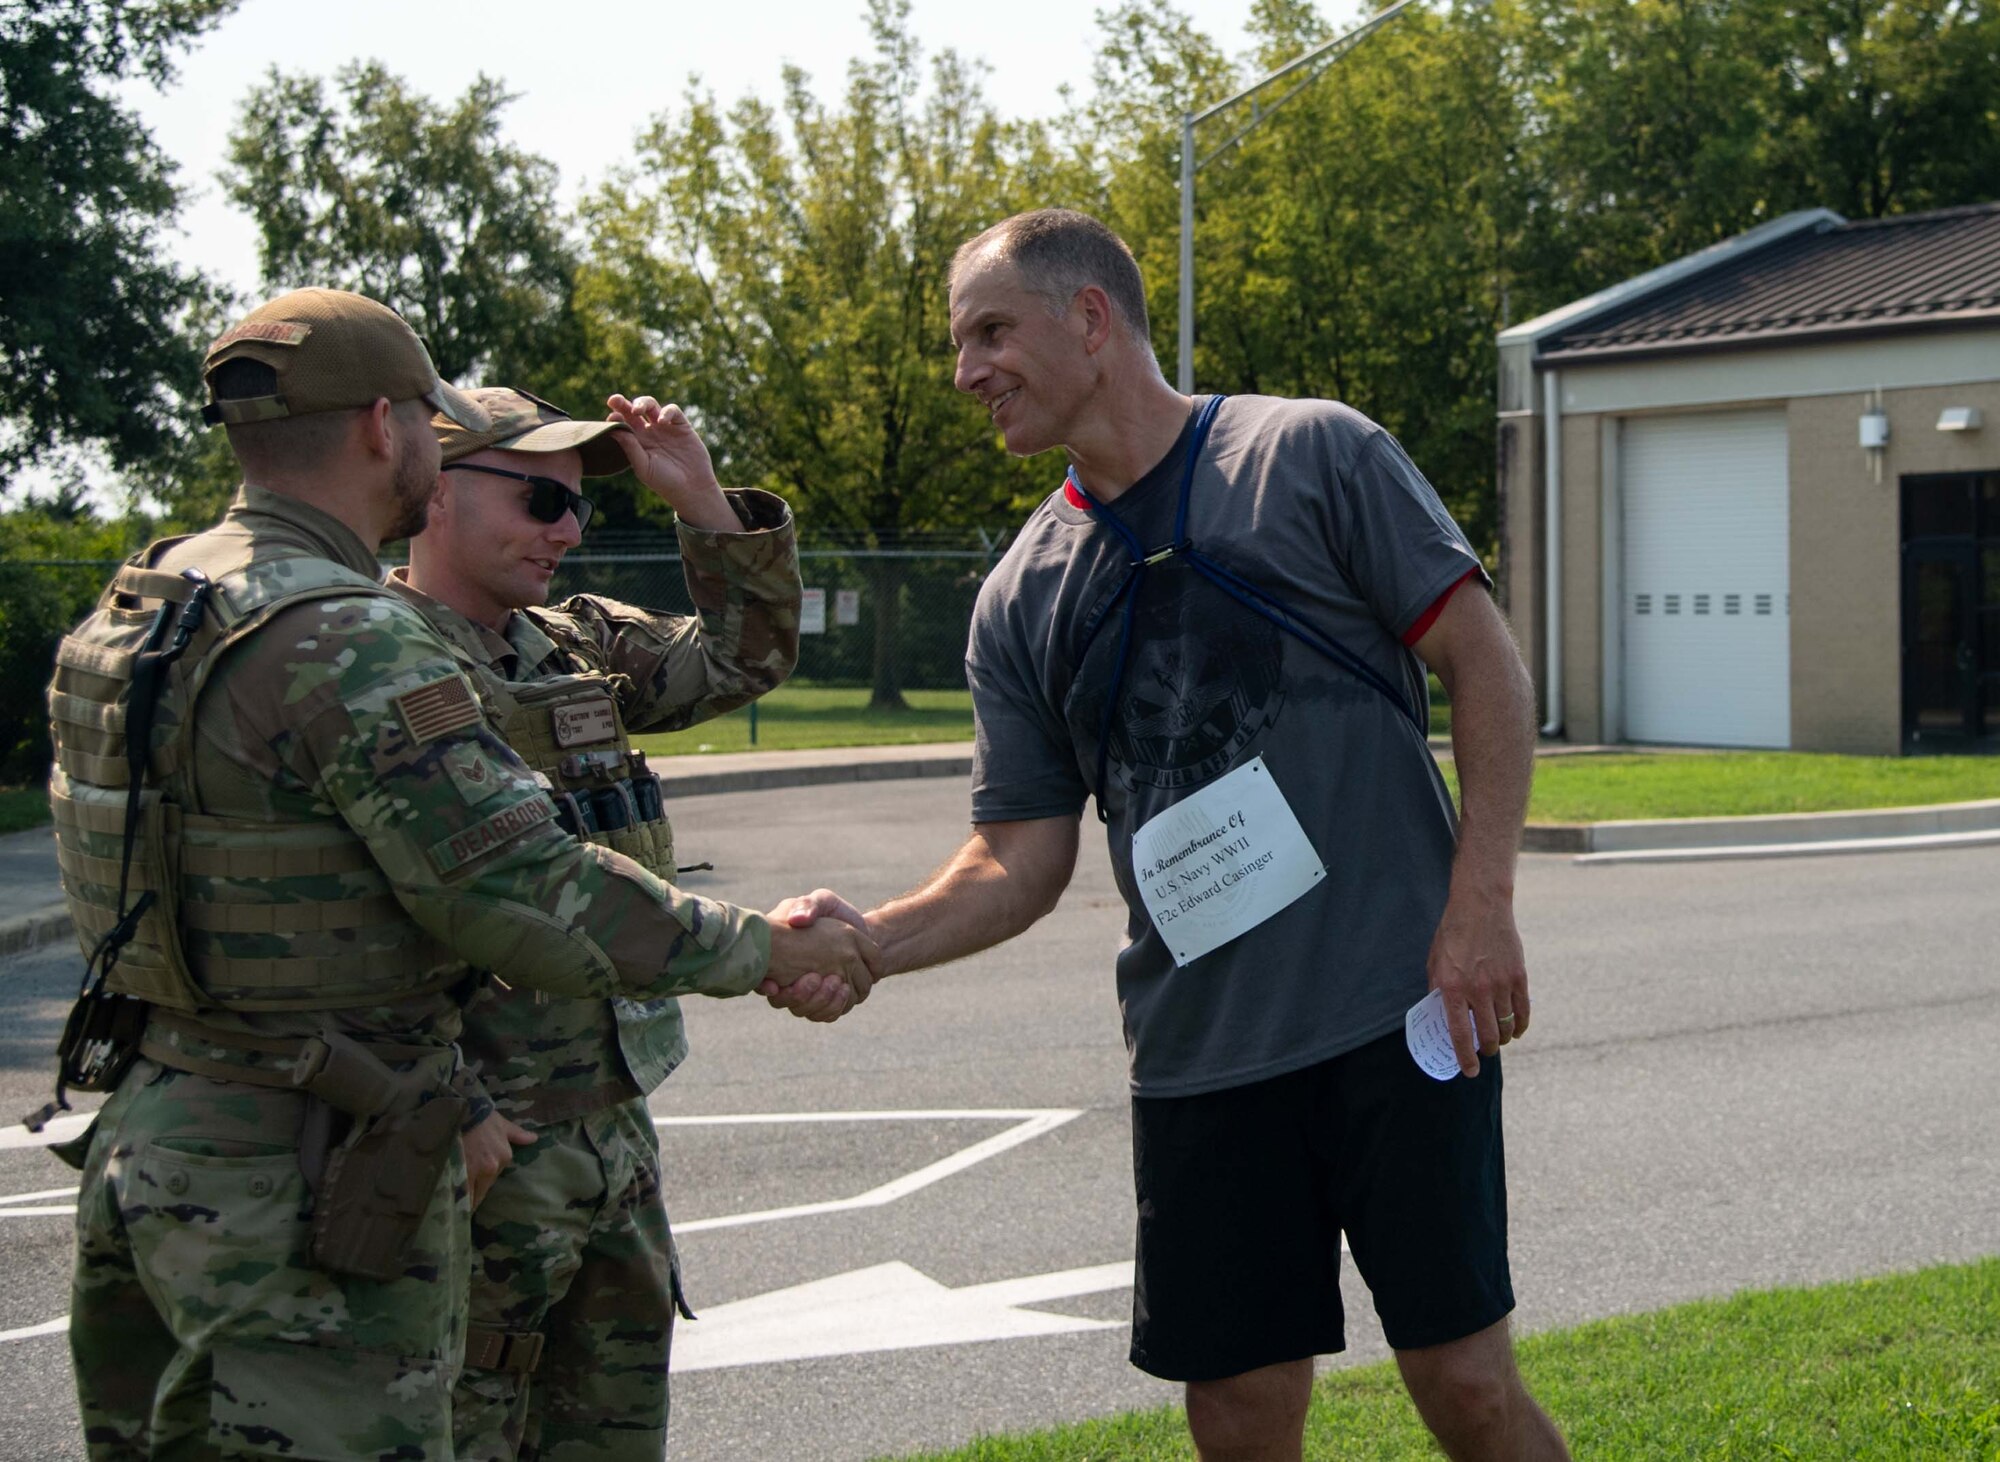 Col. Matt Husemann, right, 436th Airlift Wing commander, thanks a defender after running in a POW/MIA memorial 5k in Dover, Delaware, Sept. 16, 2022. Units from across Dover Air Force Base participated in the 5k leading up to a retreat ceremony commemorating National POW/MIA Recognition Day. (U.S. Air Force photo by Senior Airman Faith Barron)